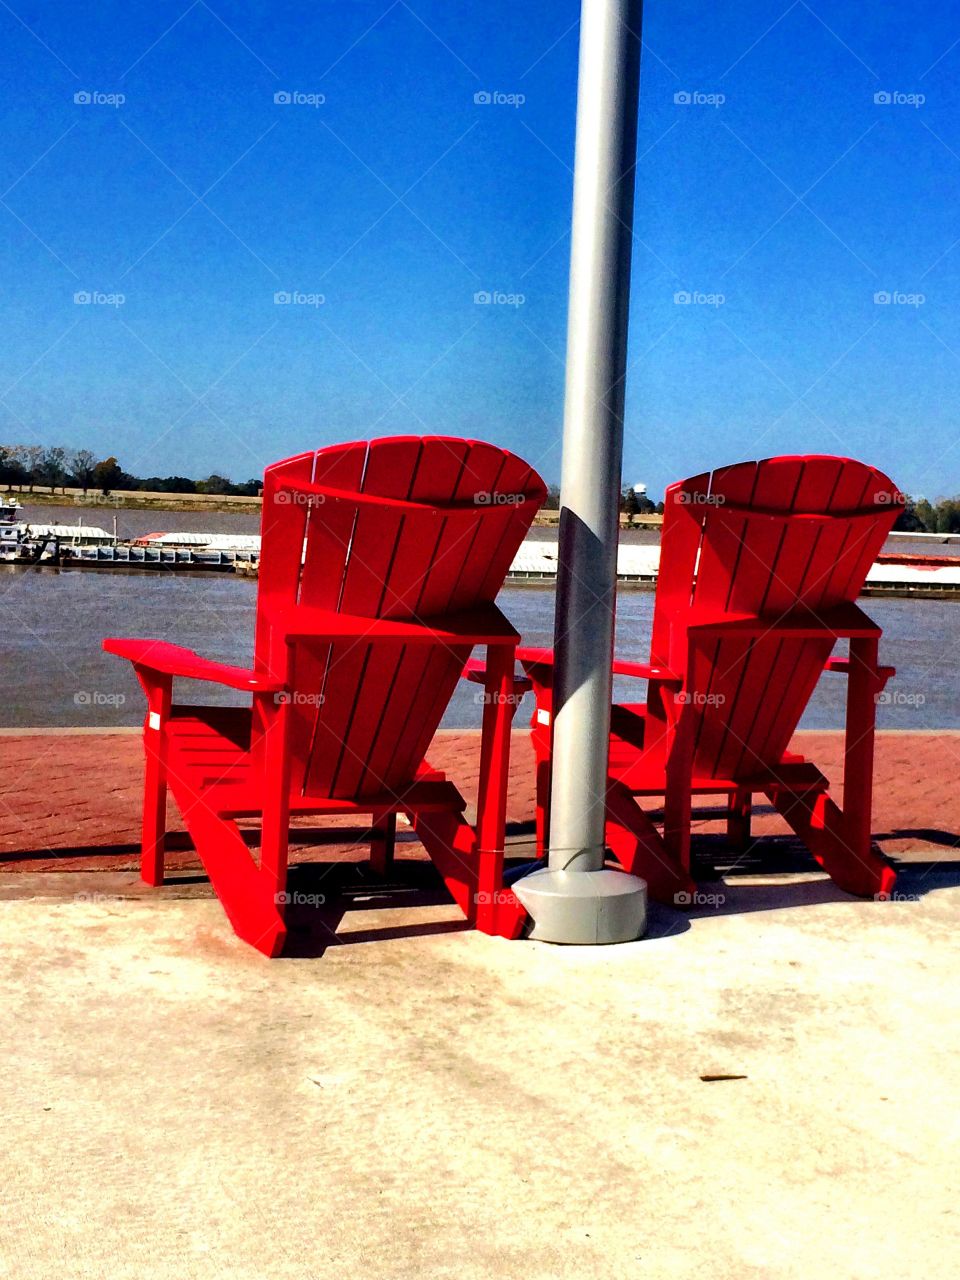 Red seats in the Mississippi 